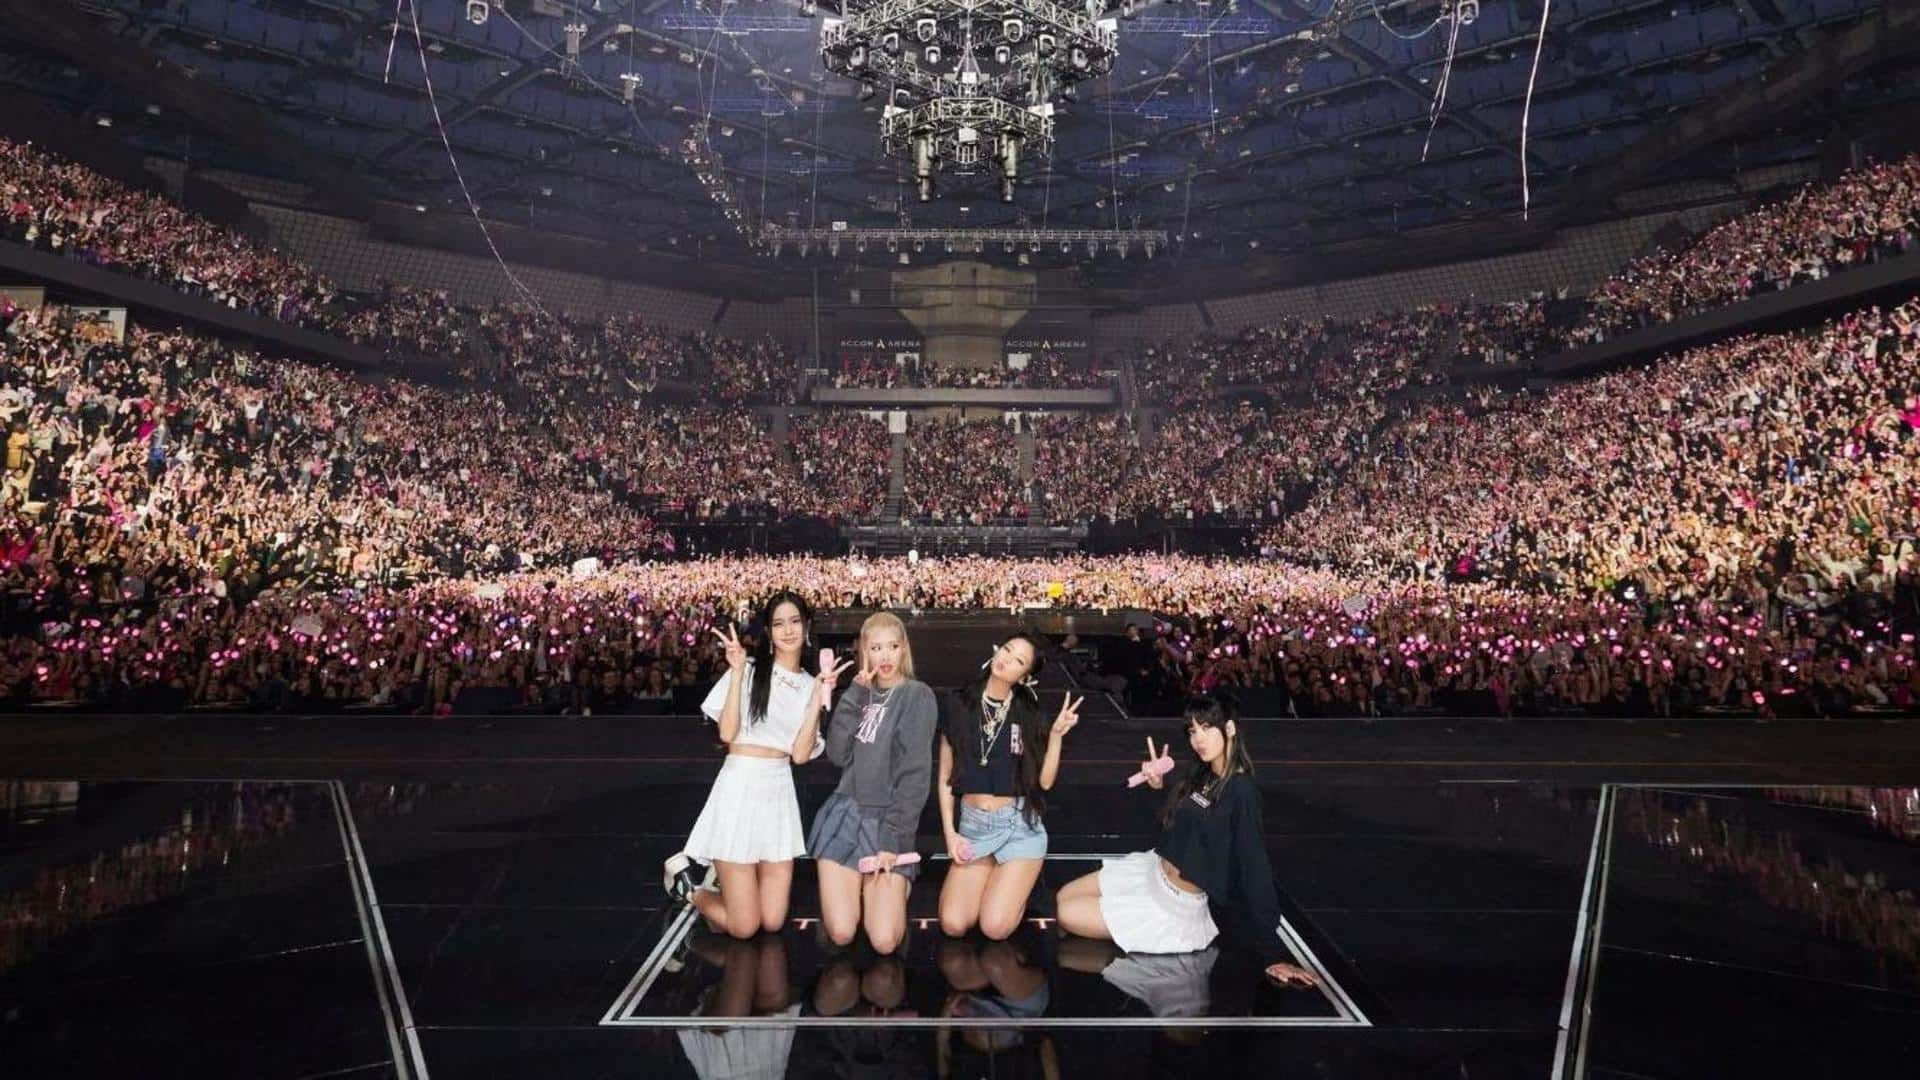 BLACKPINK 'Born Pink World Tour' becomes highest-grossing tour with $100M